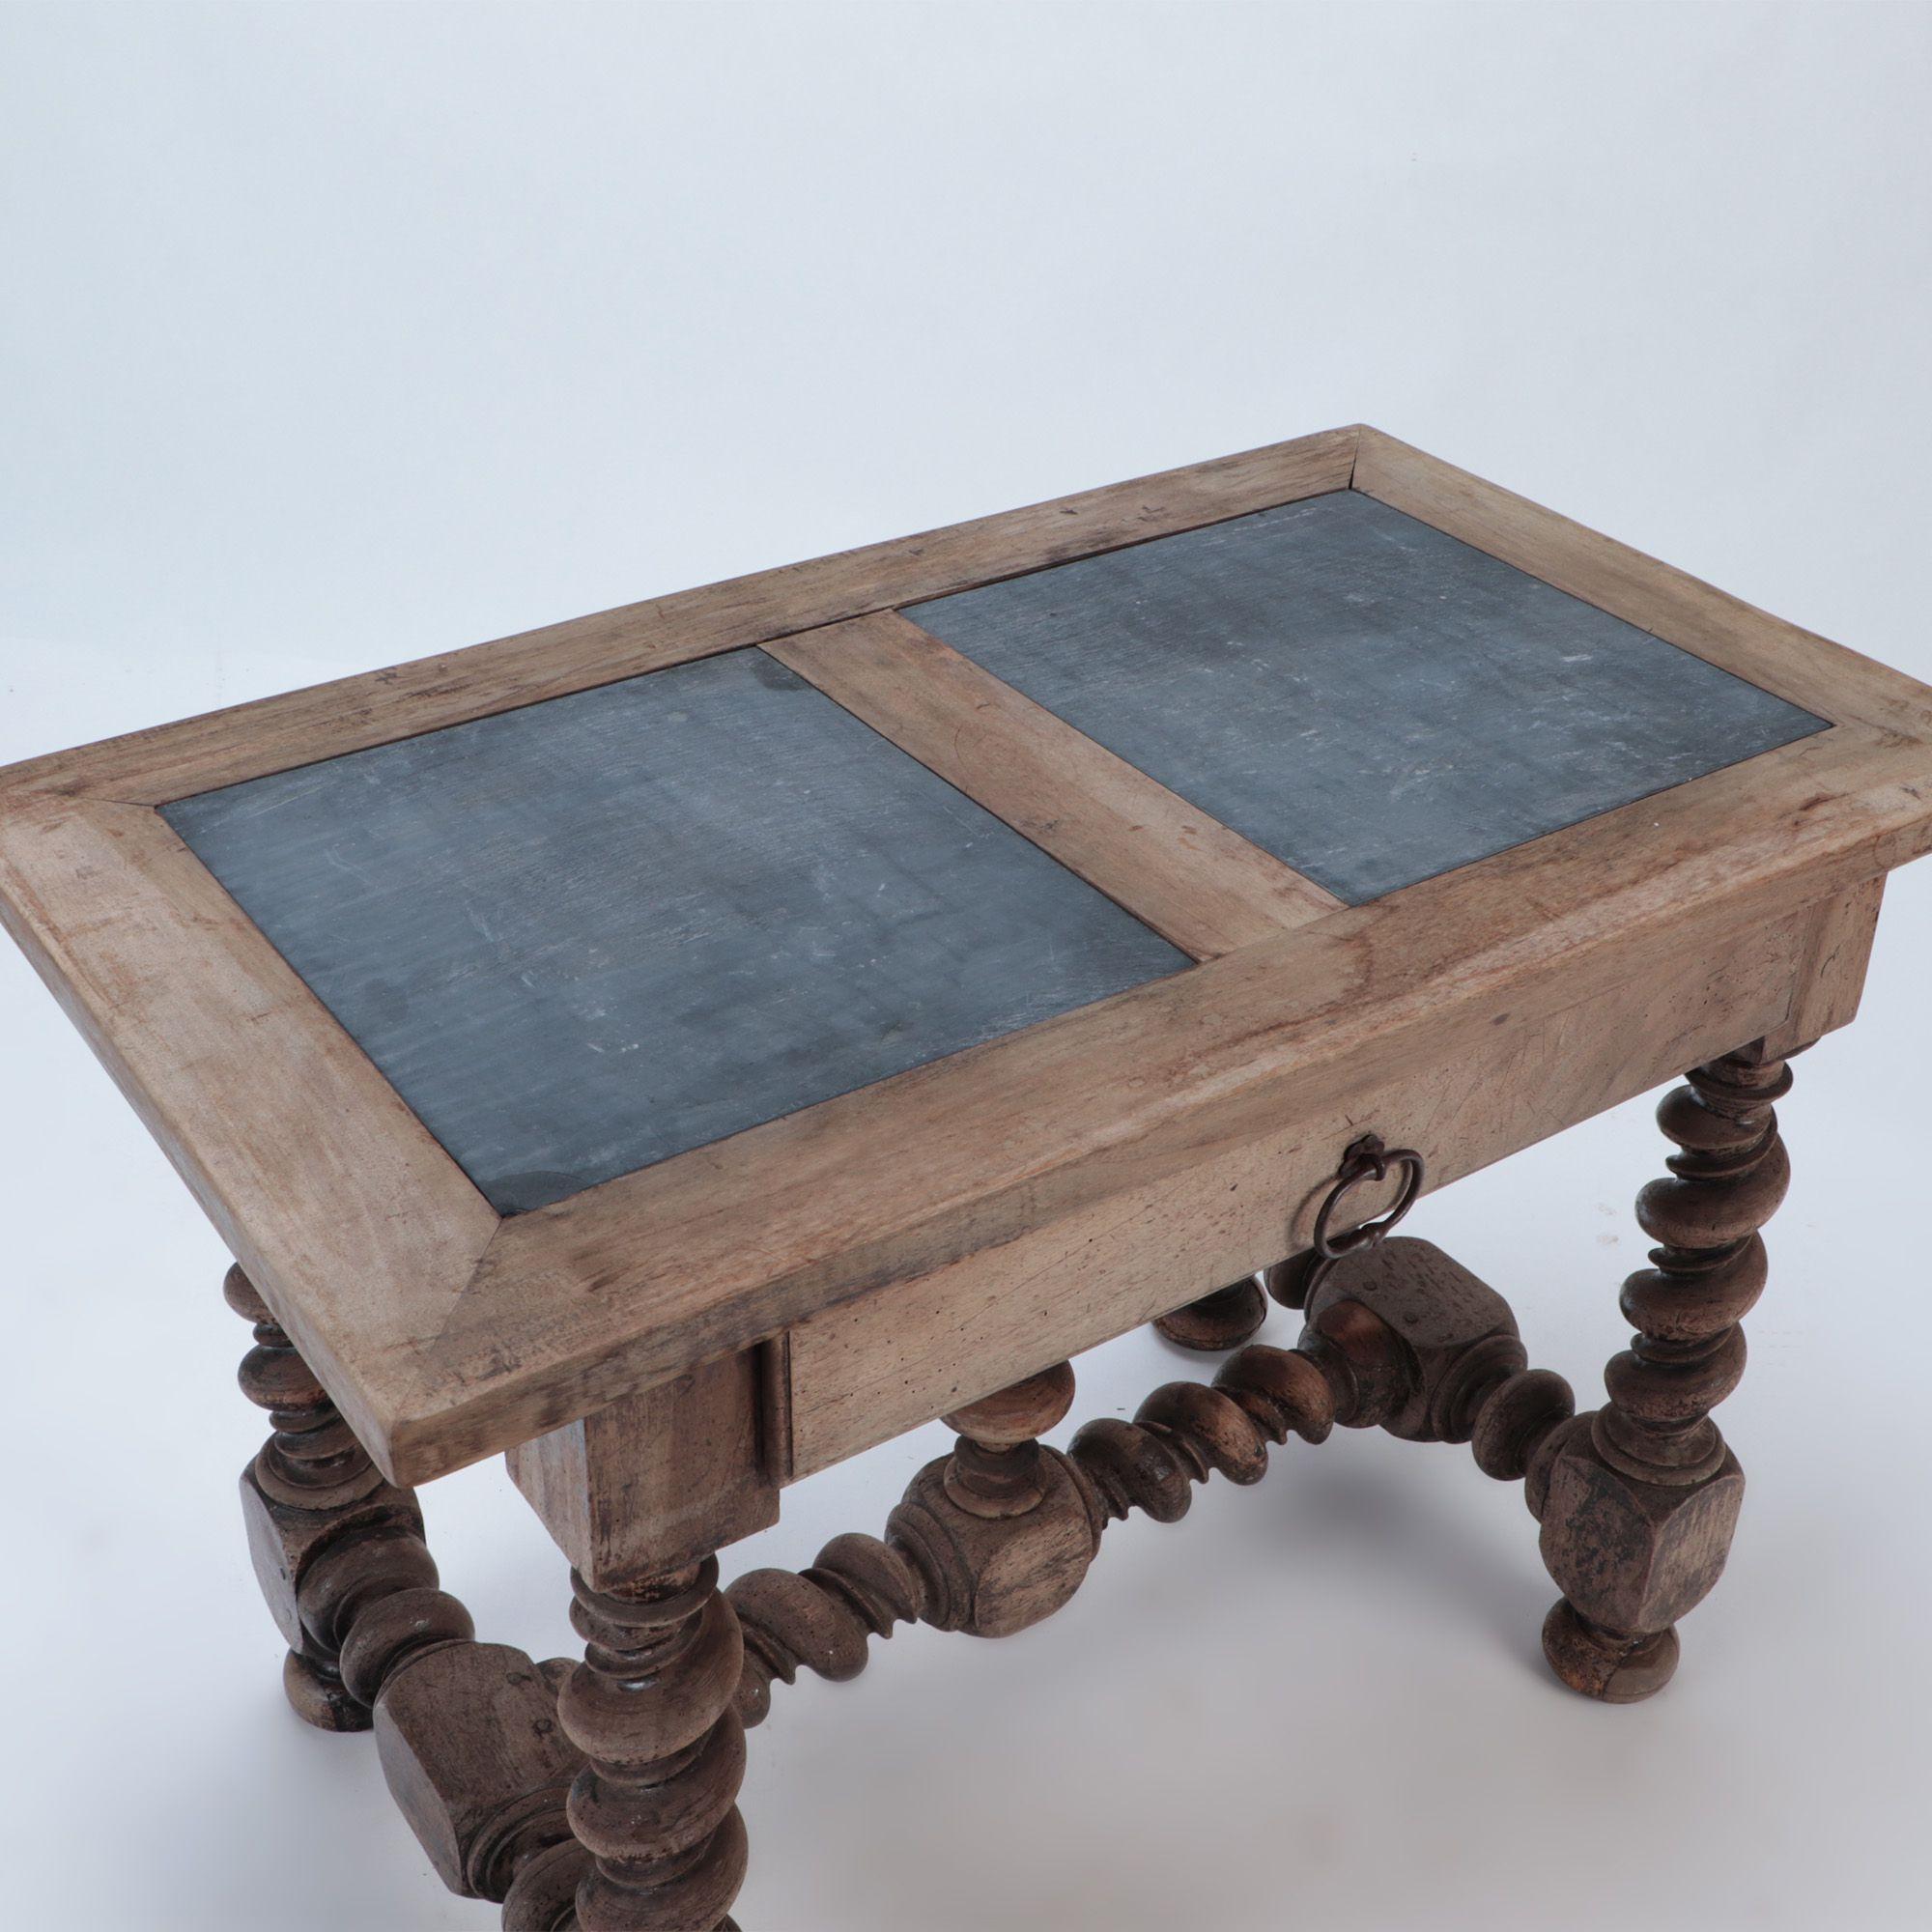 19th Century French Antique Stone Top Table with Twisted Legs, circa 1880